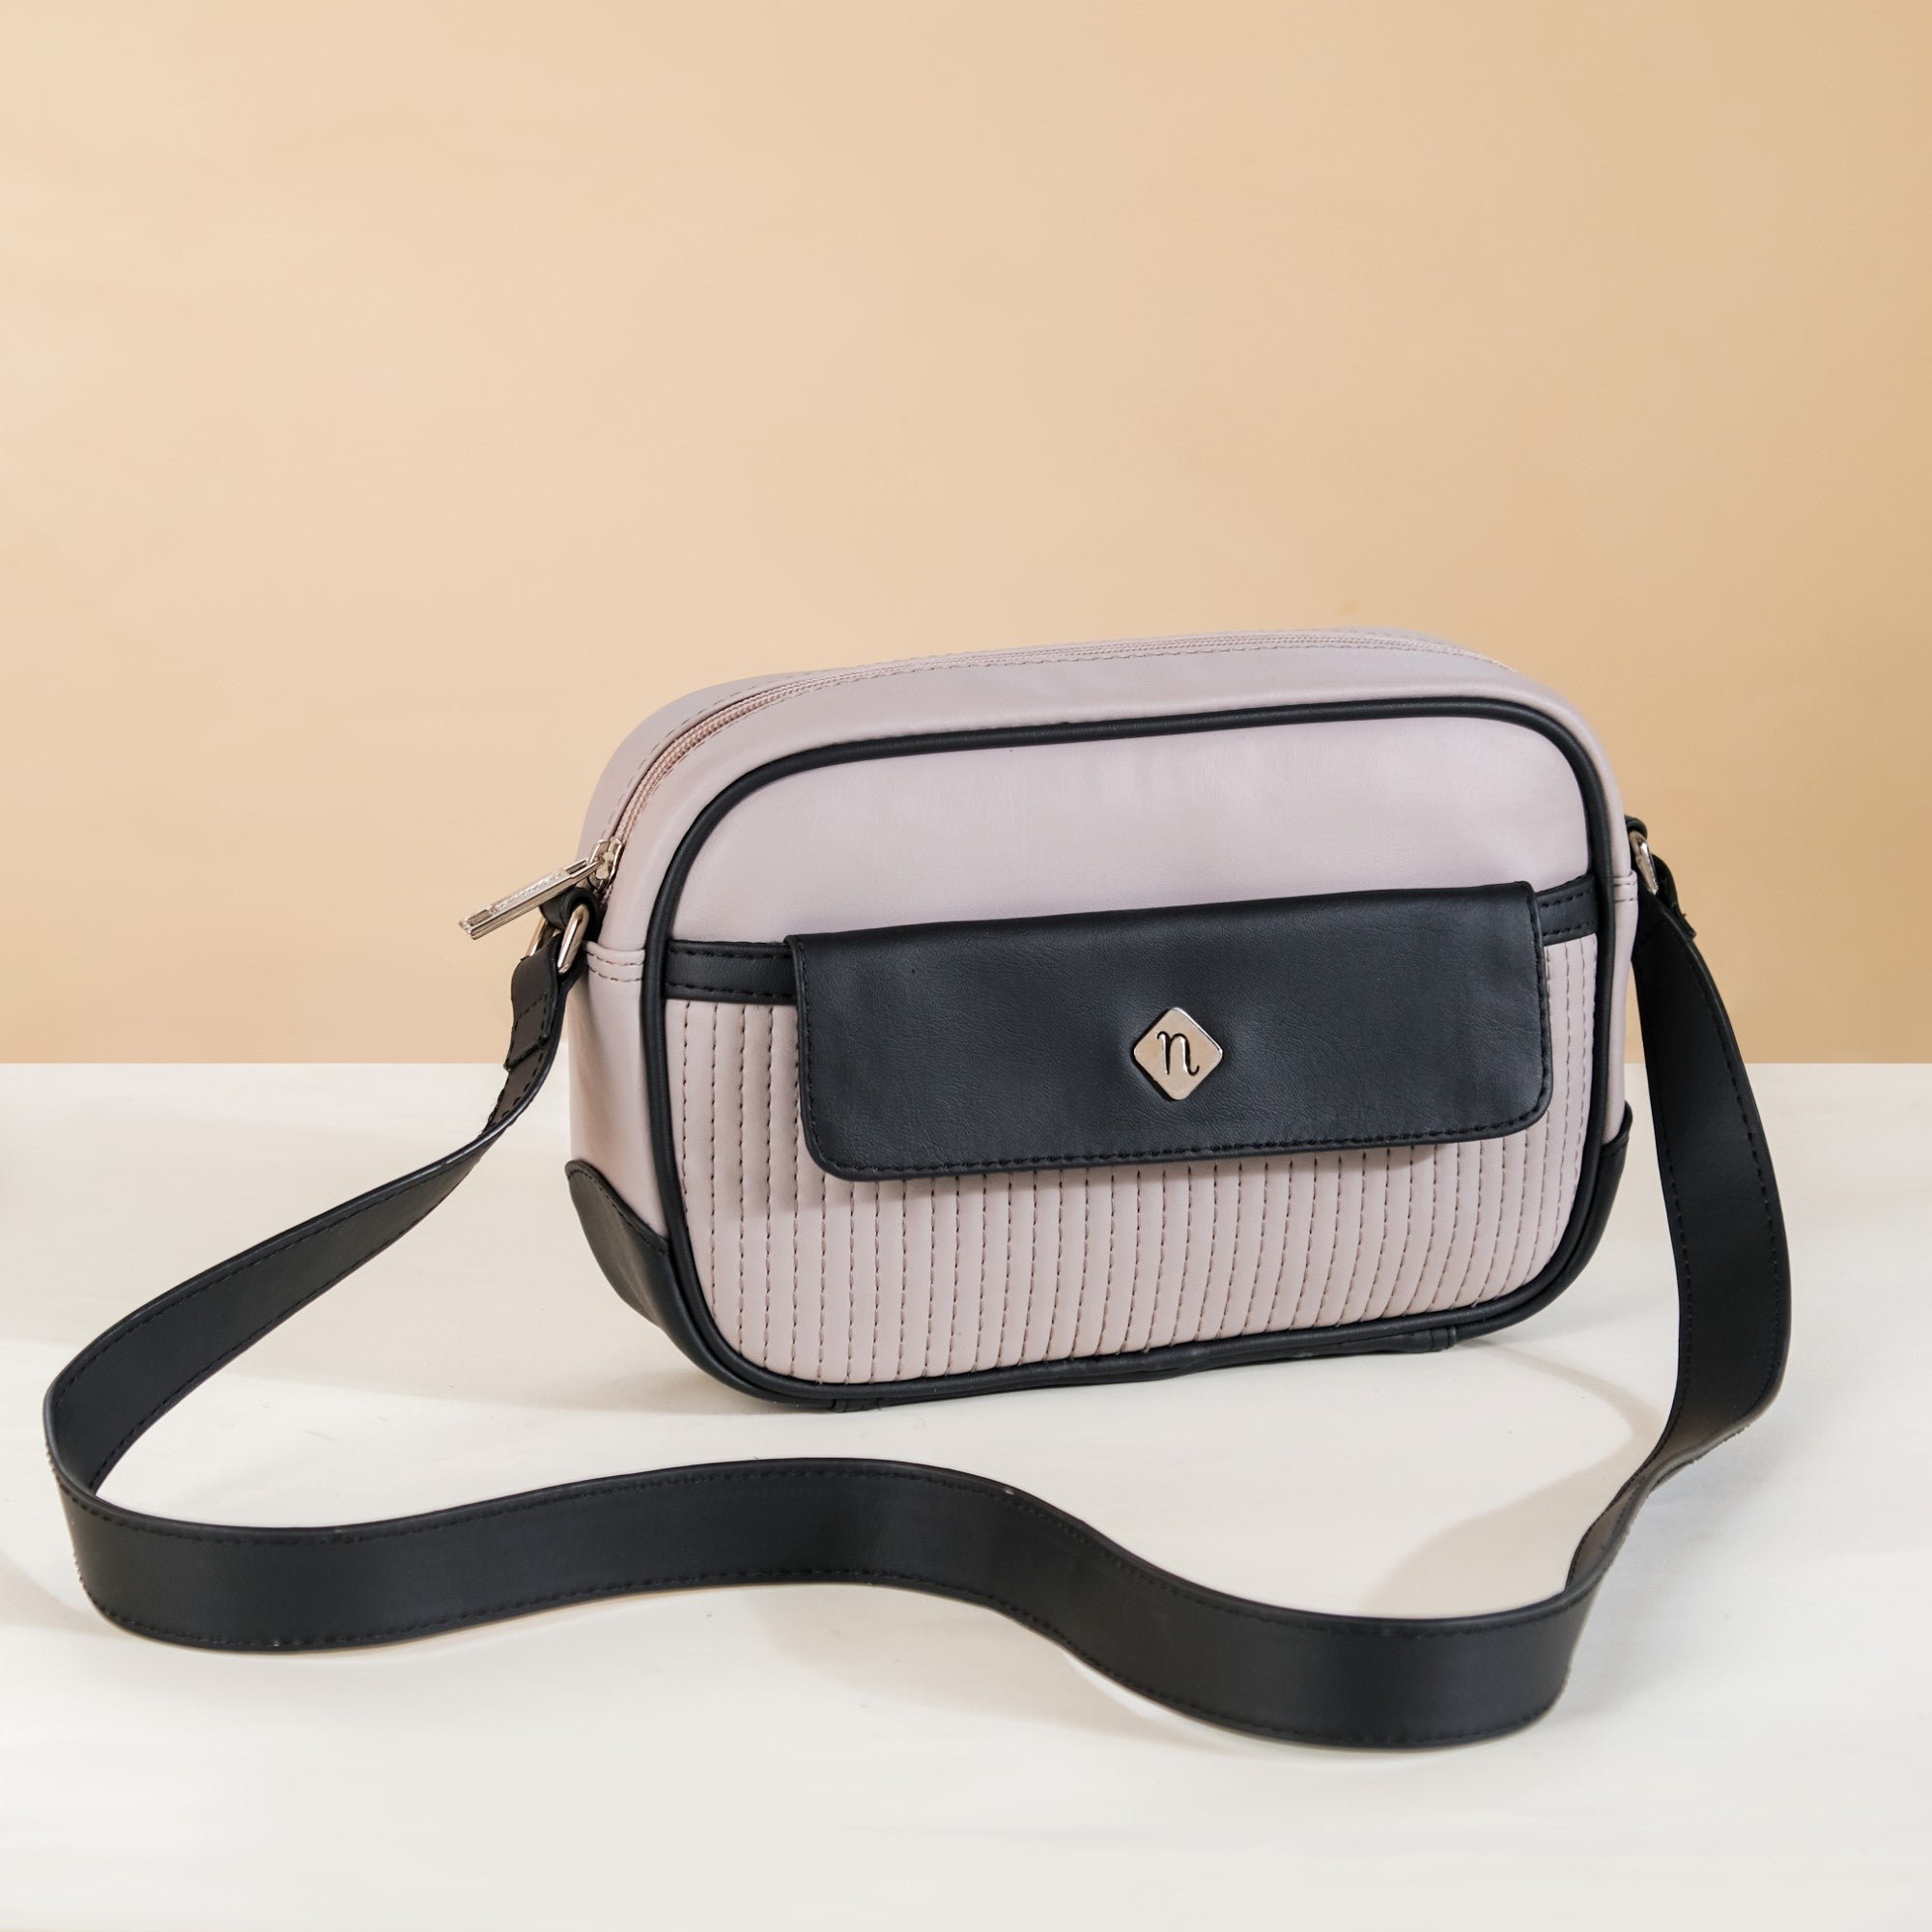 Buy Finest Sling Bags and Handbags for Women Online in India